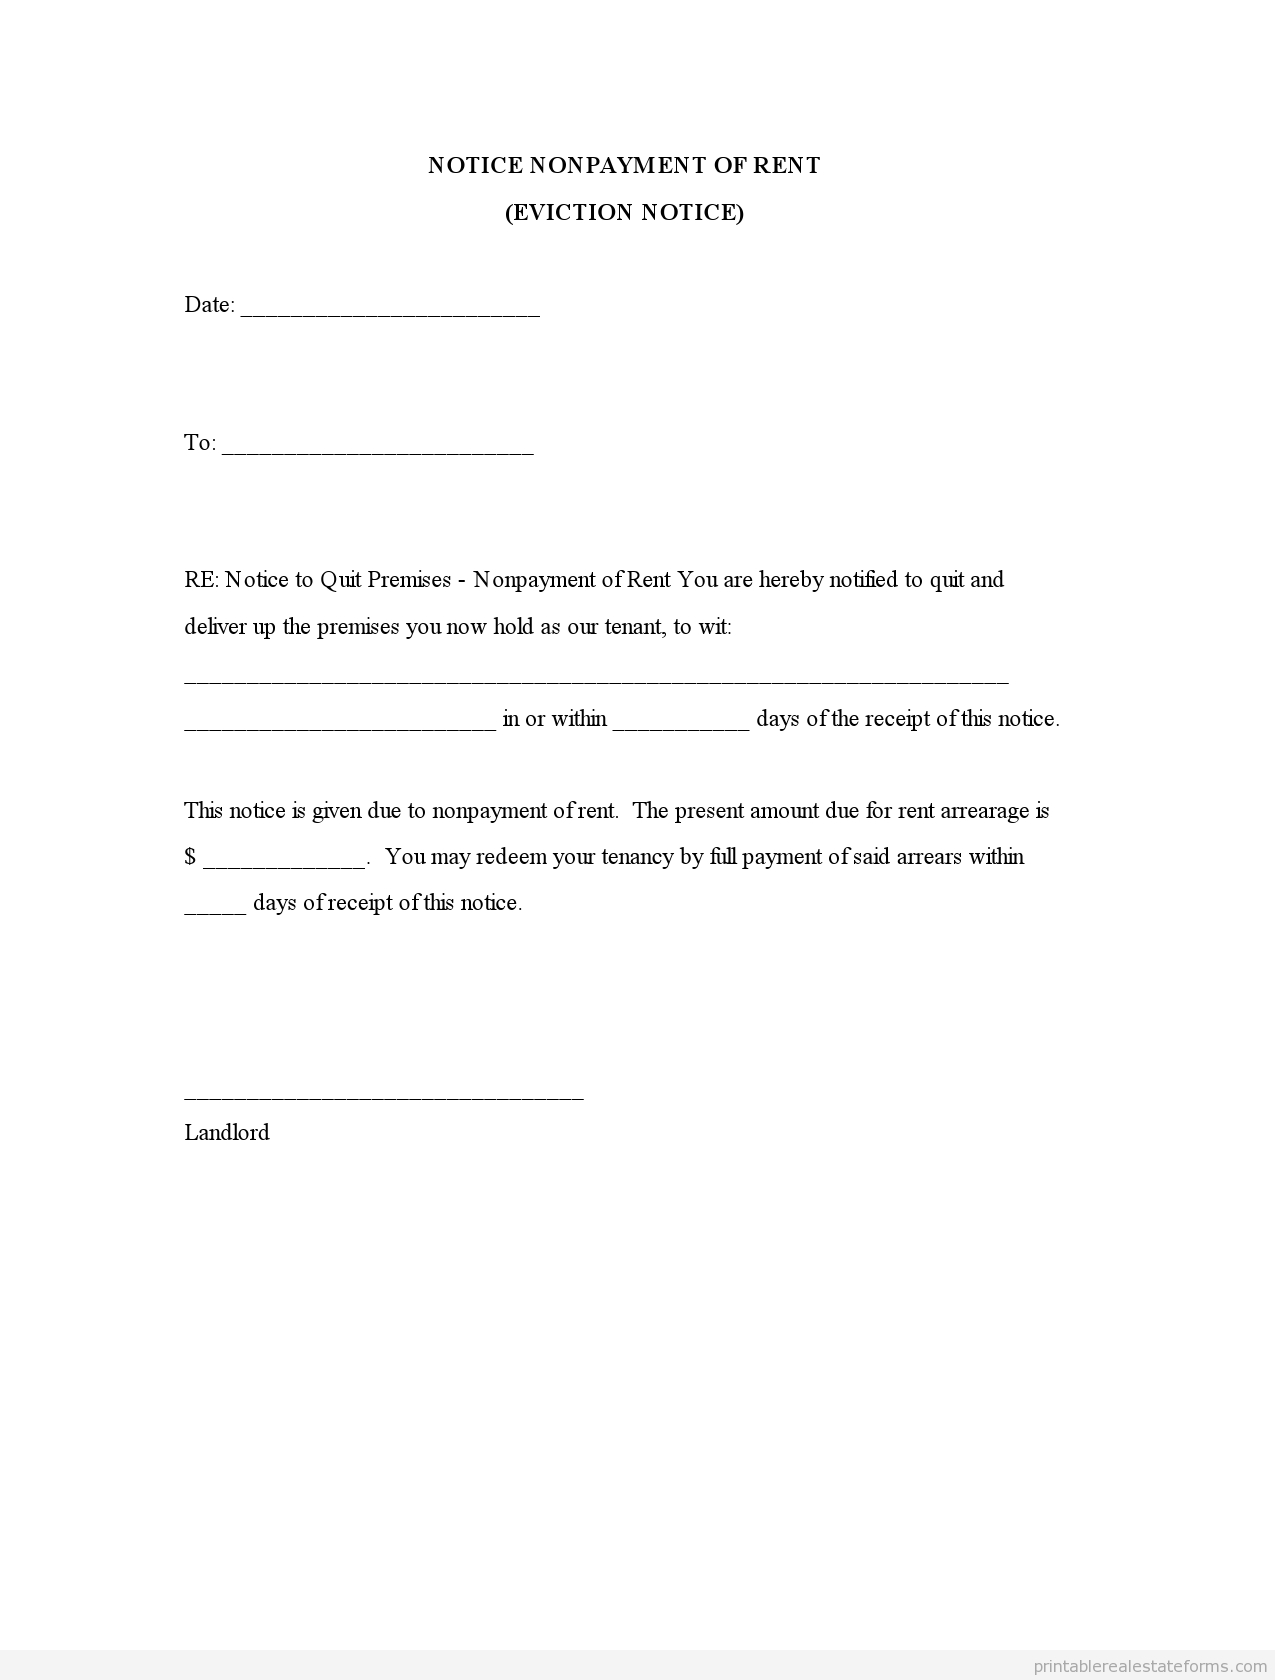 letter of intent to evict template example-Printable Sample Letter Intent Sample Form Real Estate Forms Pinterest 20-k